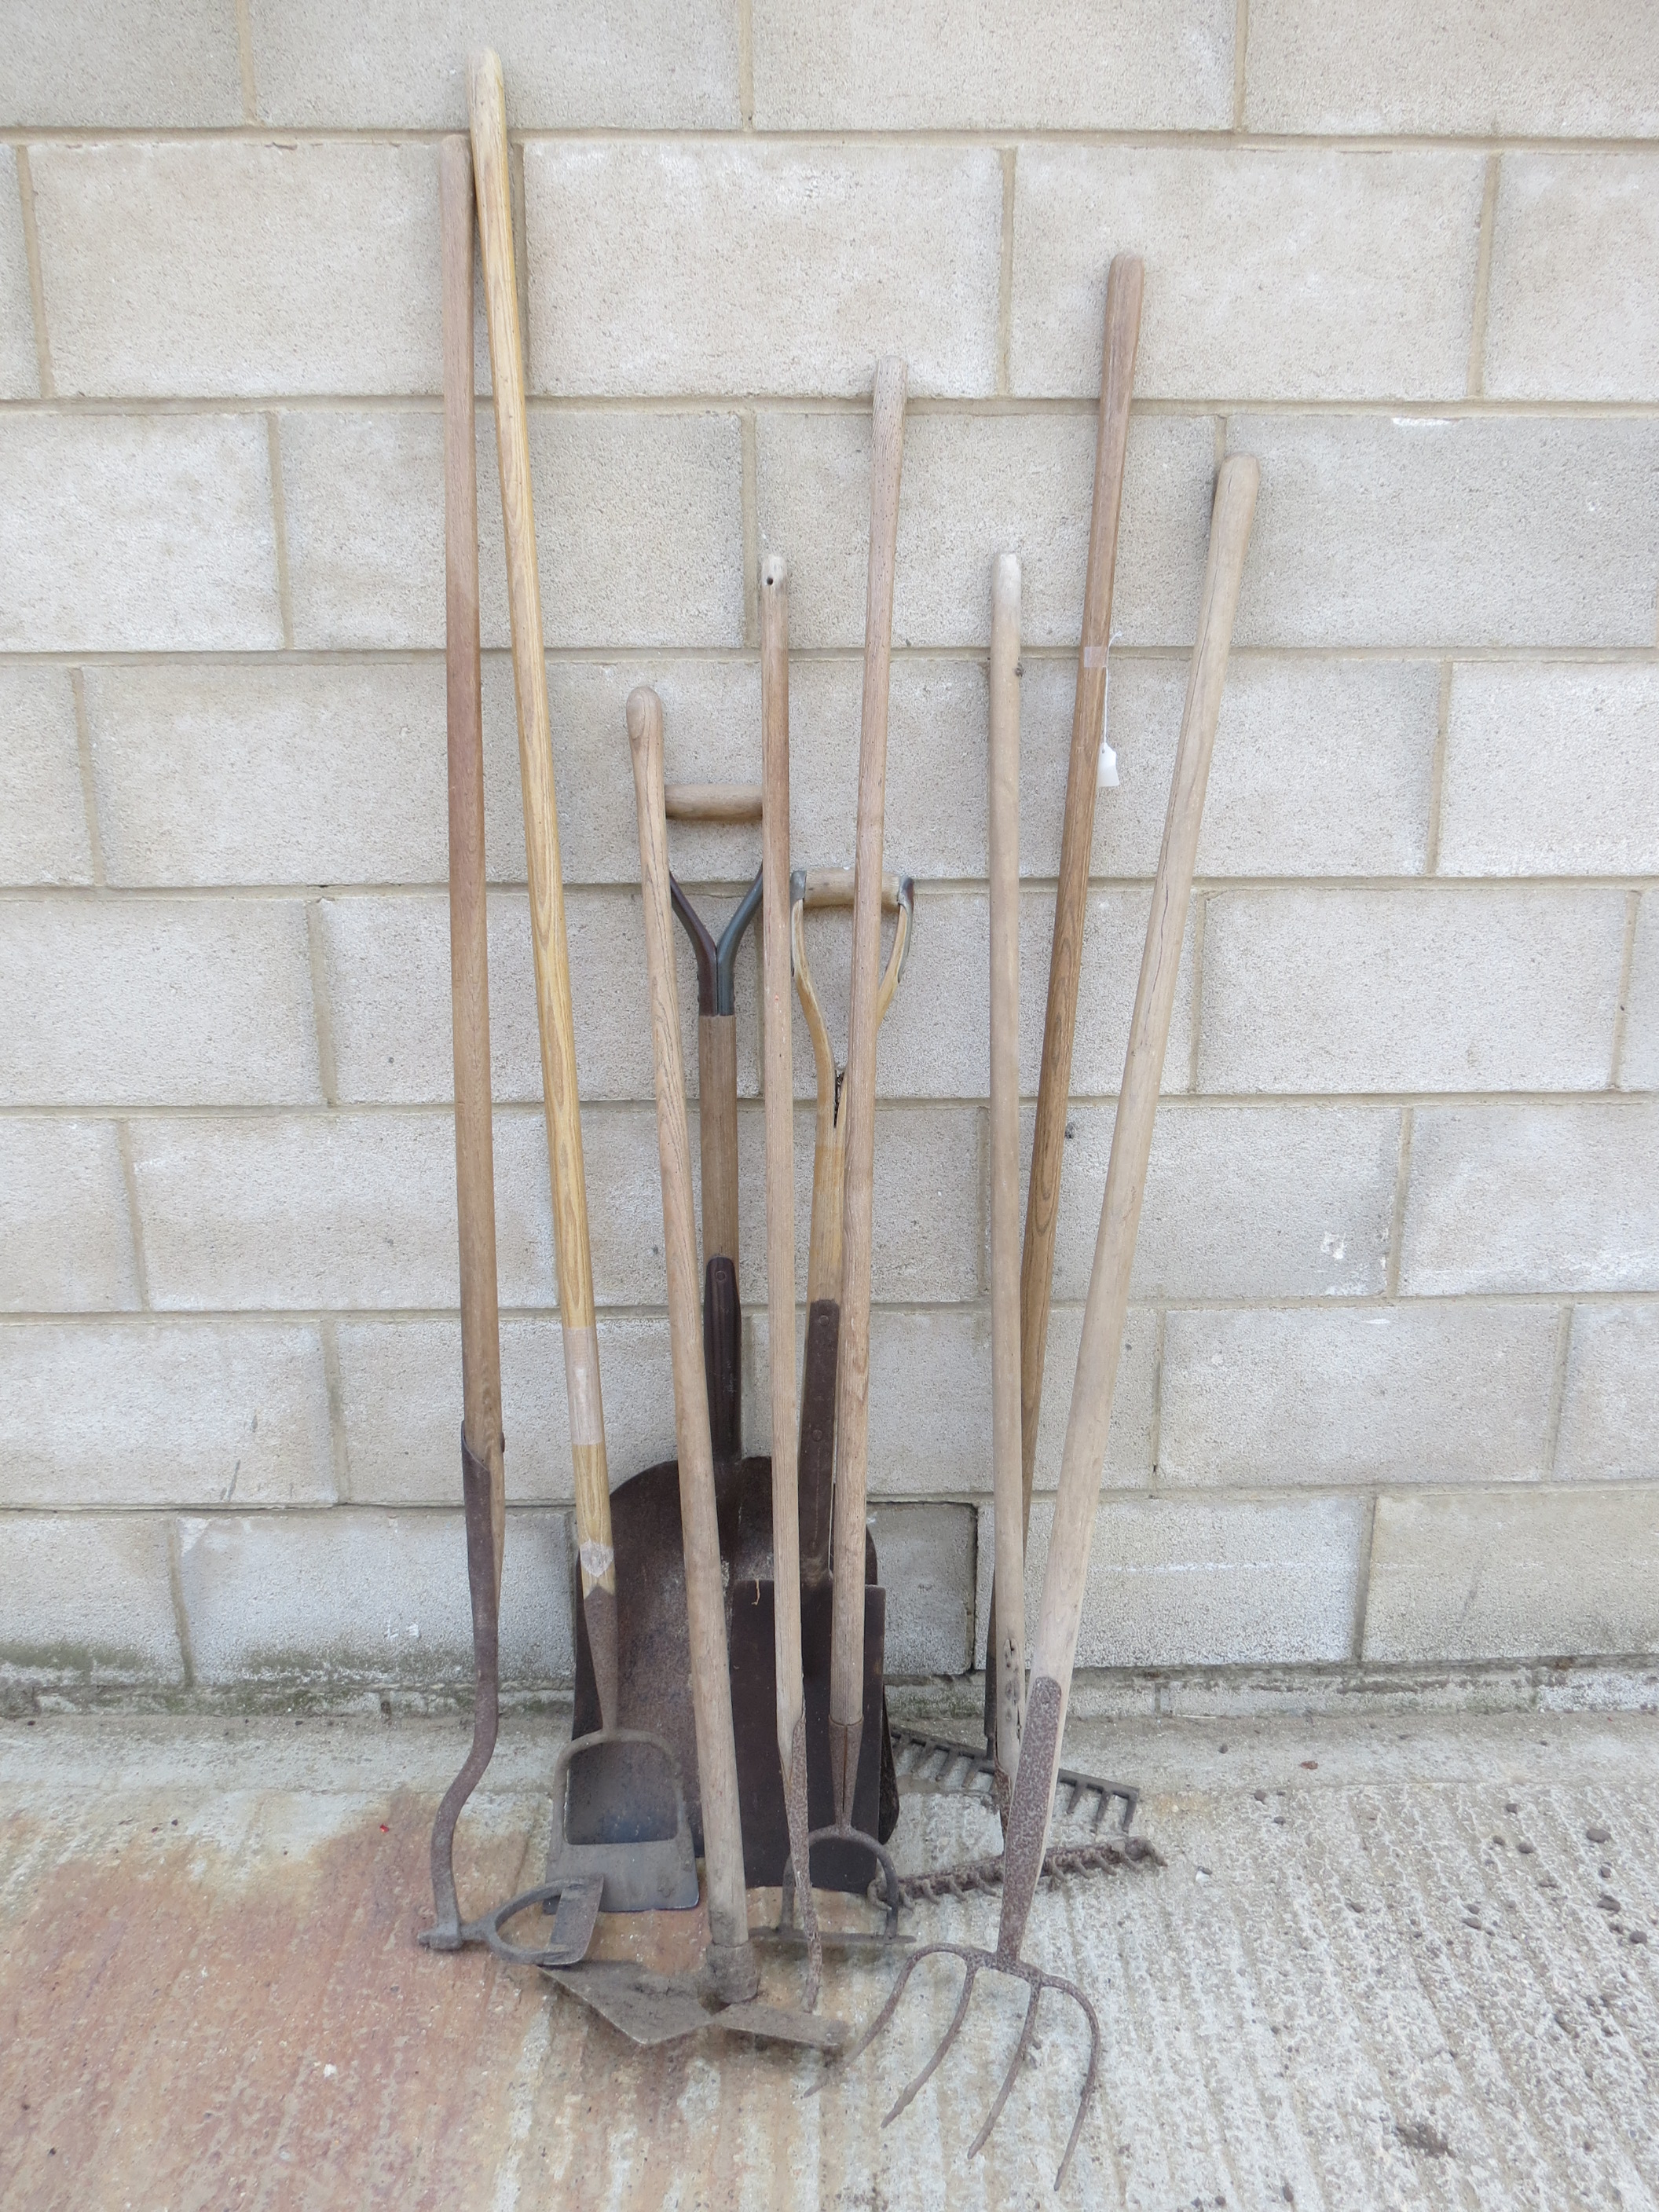 A quantity of long handled garden tools including rakes, hoes, a spade and broad shovel.